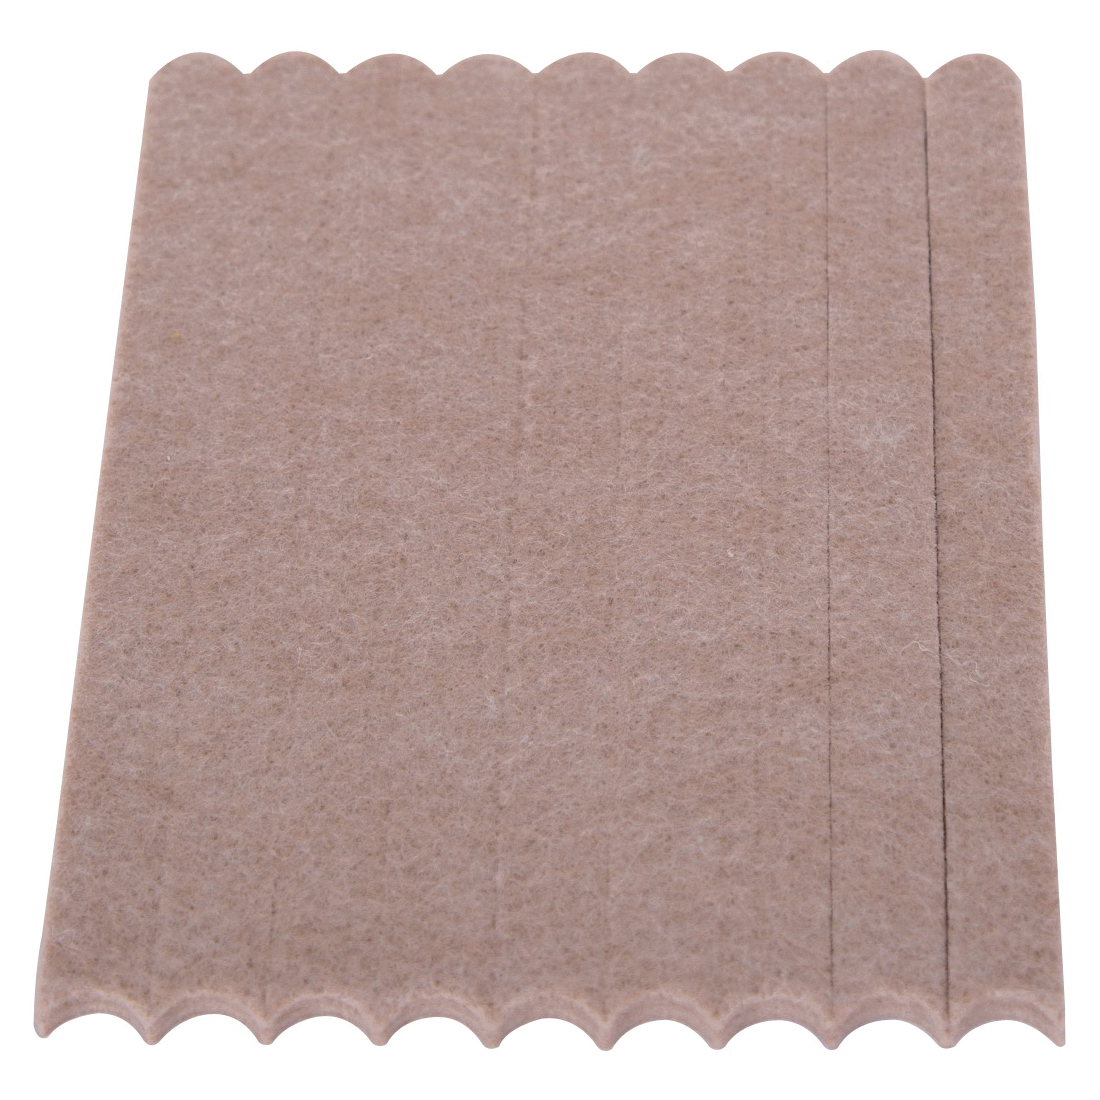 FE-S106-PS Furniture Pad, Felt Cloth, Beige, 6 x 1/2 in Dia, 1/2 in W, 3/16 in Thick, Square